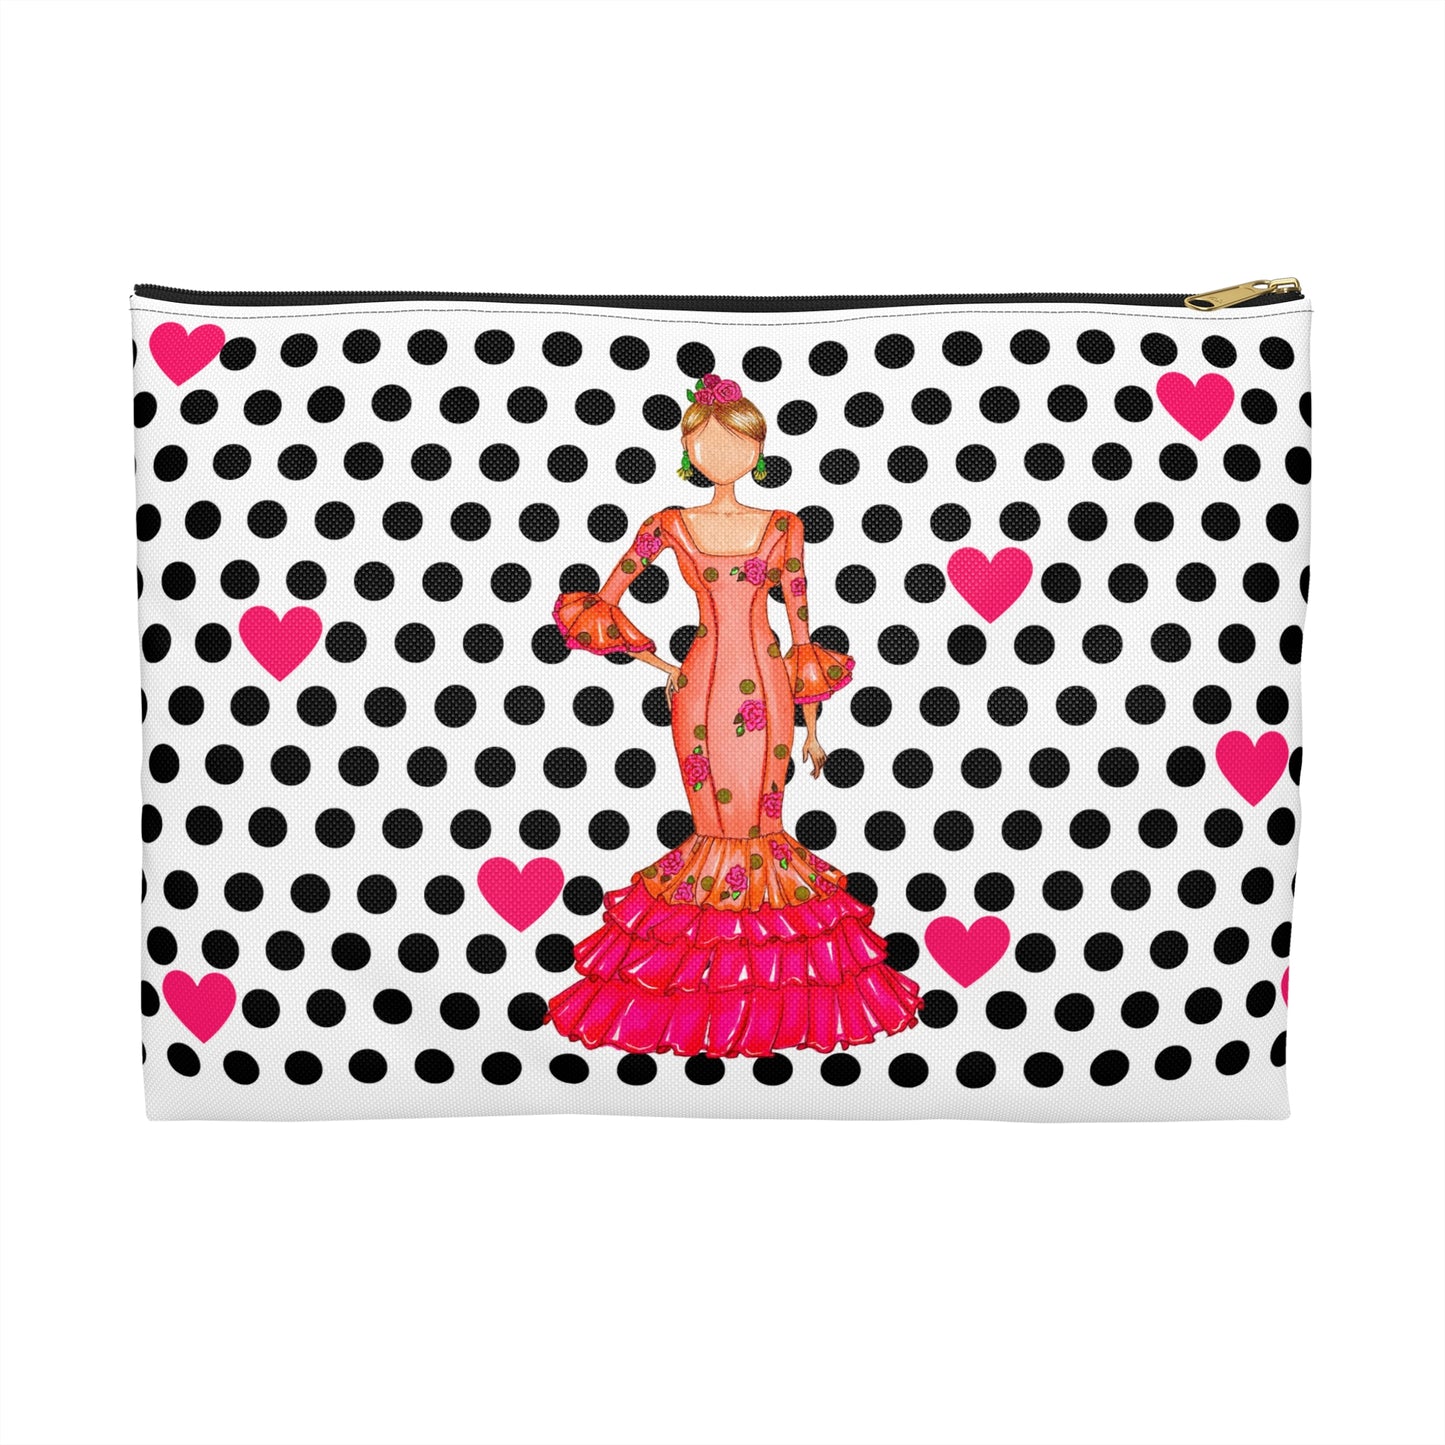 a polka dot purse with a woman in a pink dress